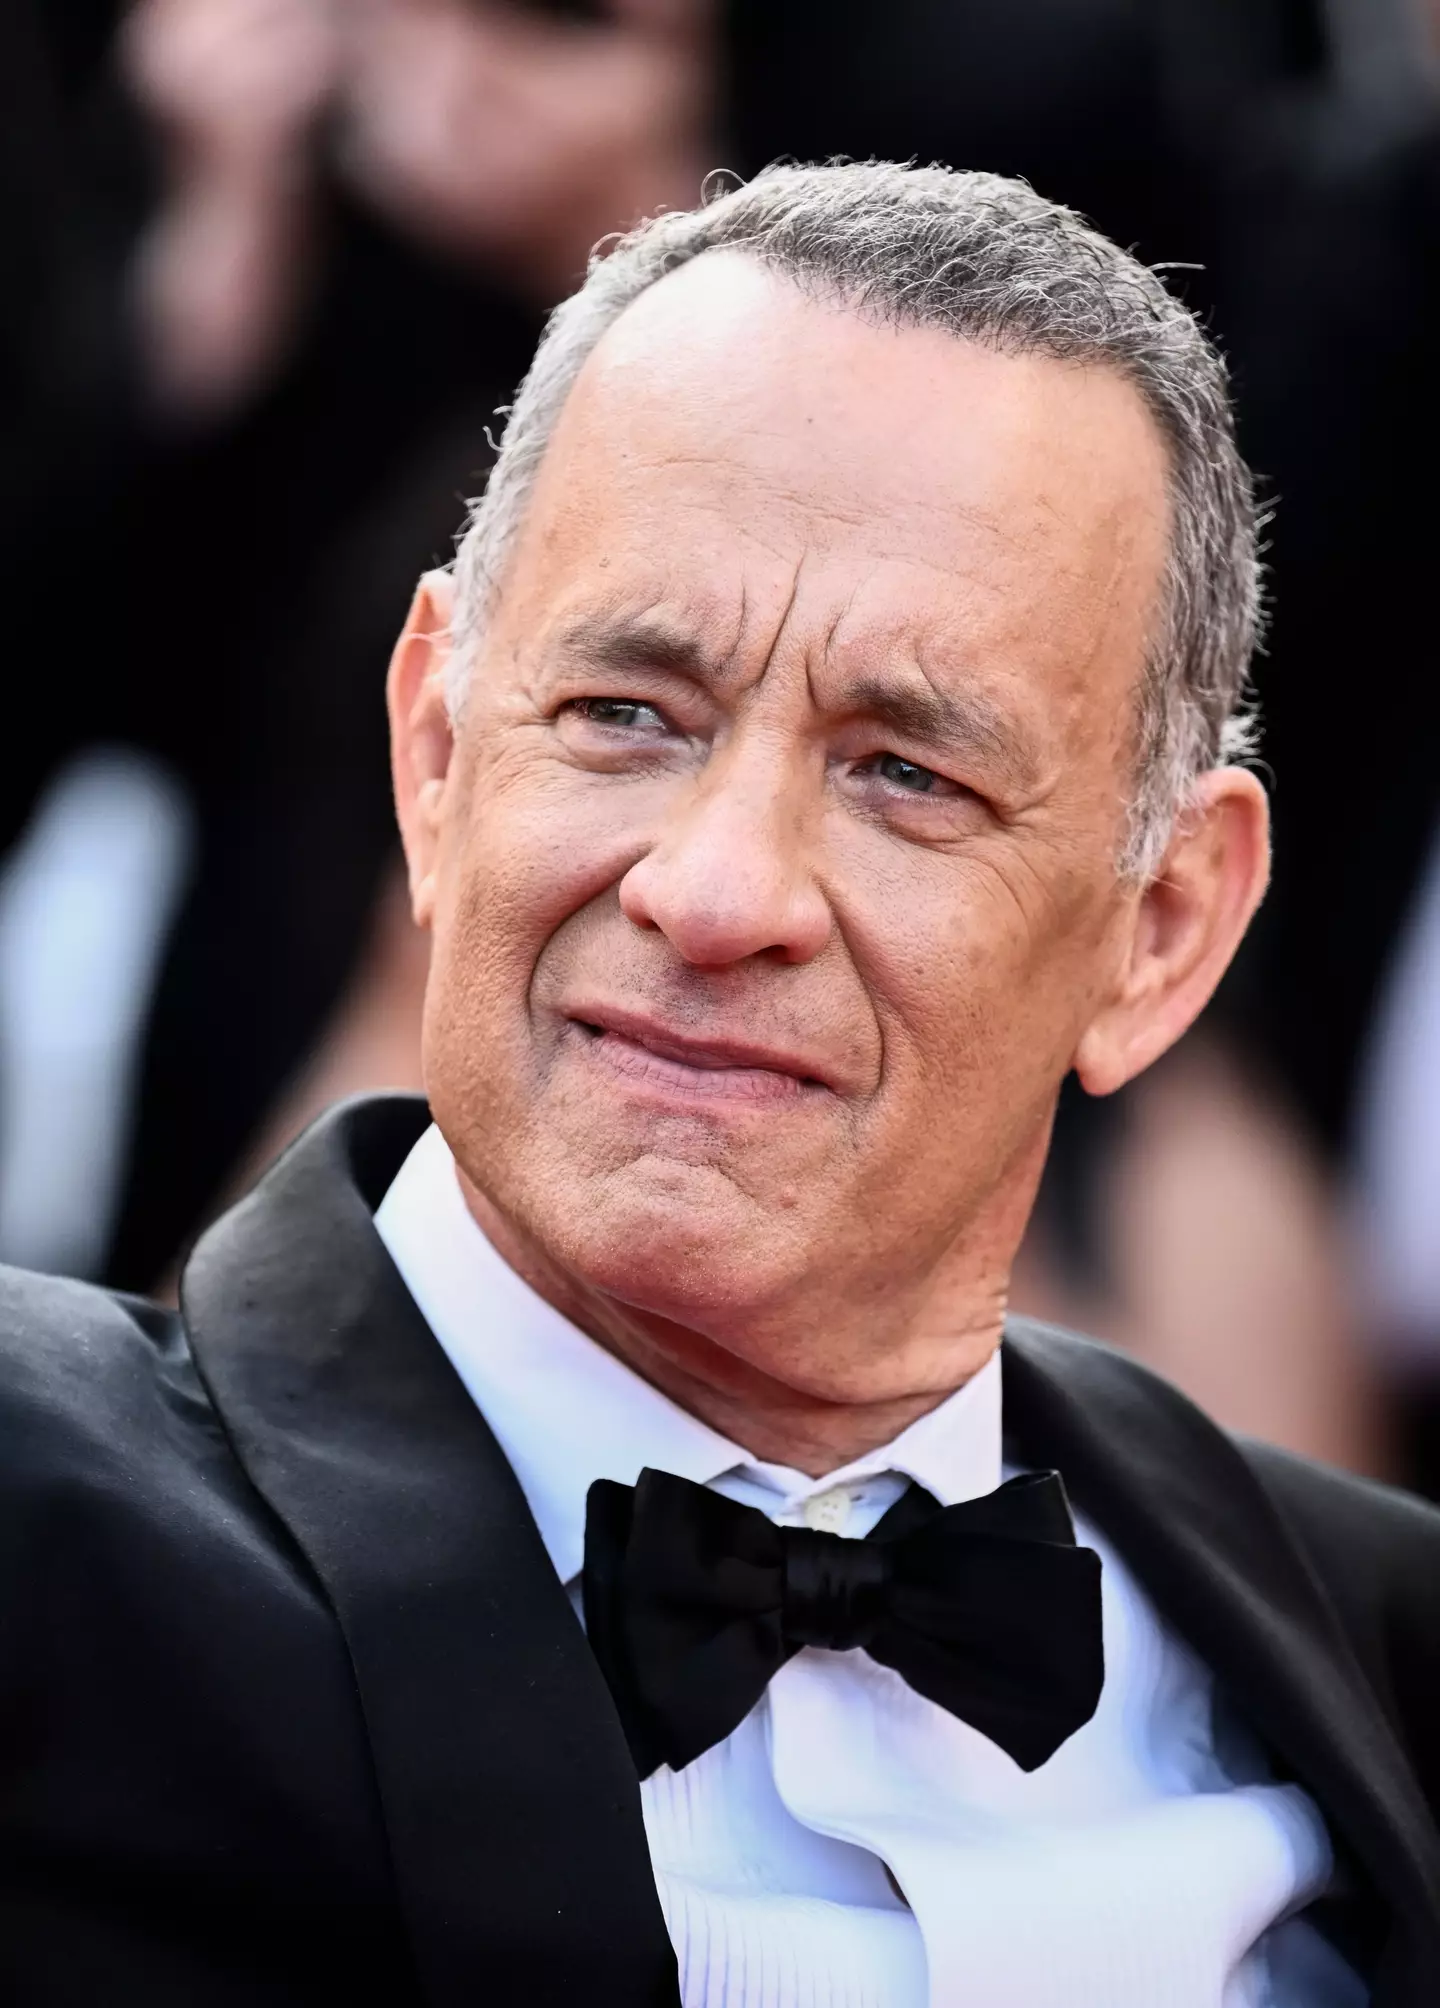 The film is one of Hanks' less widely known movies.